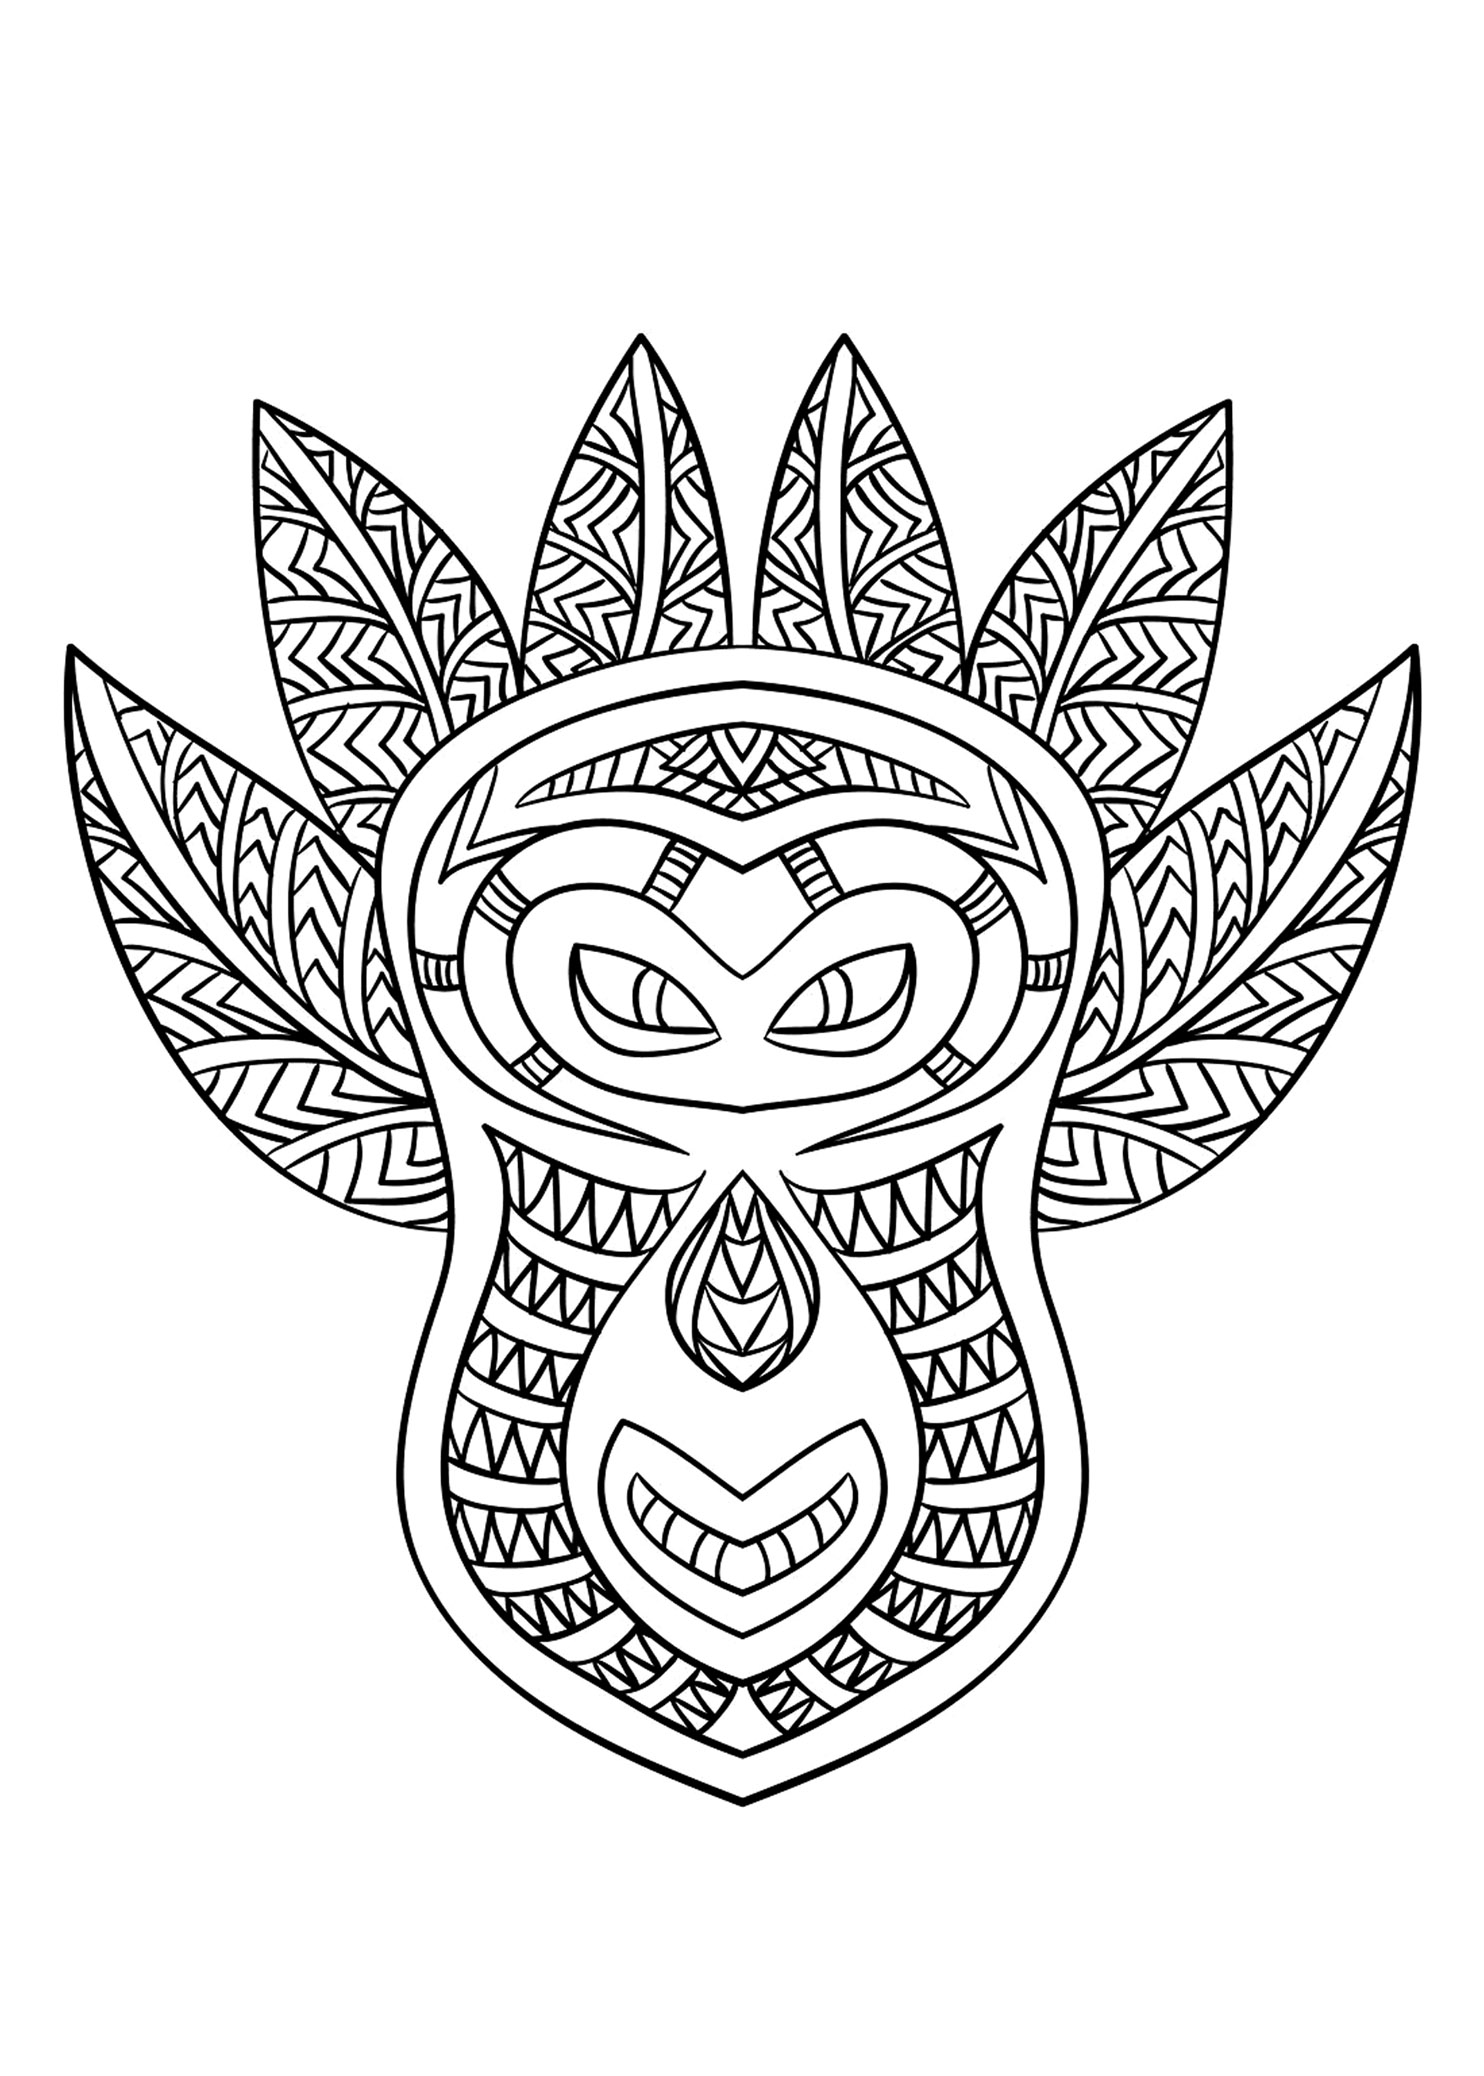 Get your pencils and markers ready to color this Masks coloring page